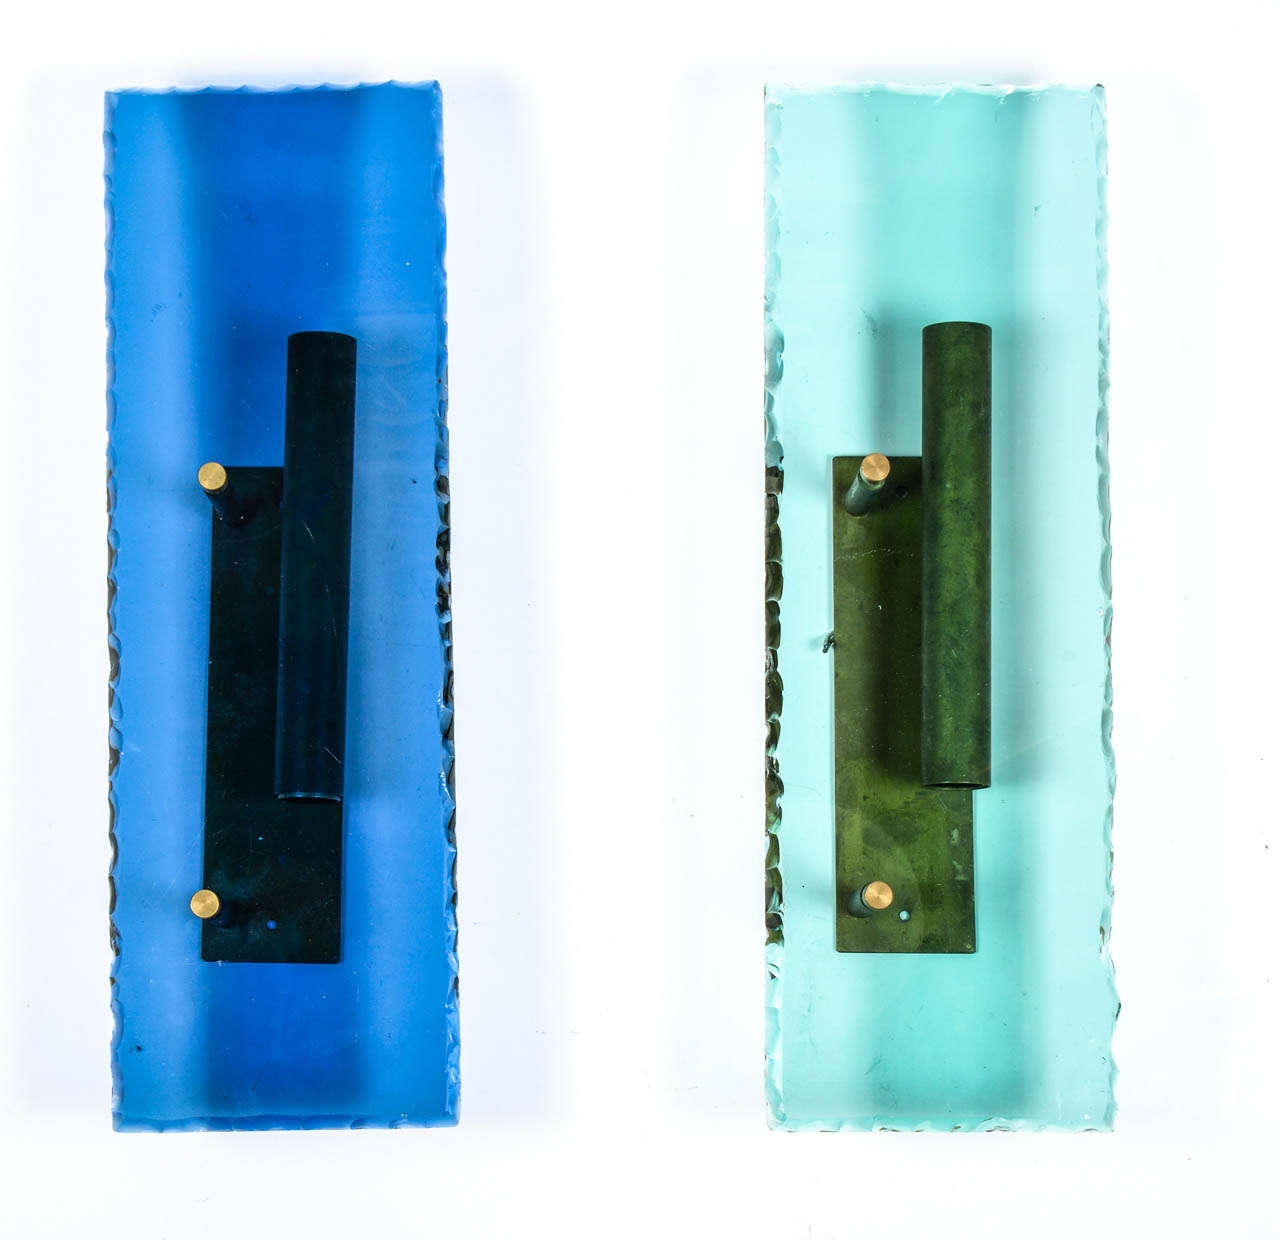 Pure set of eight wall sconces in the style of Fontana Arte in the 1950s.
Each sconce is a metal structure made for two bulbs behind a translucent roughly cut blue or green piece of glass.

Four of each color is available.

Perfect condition,